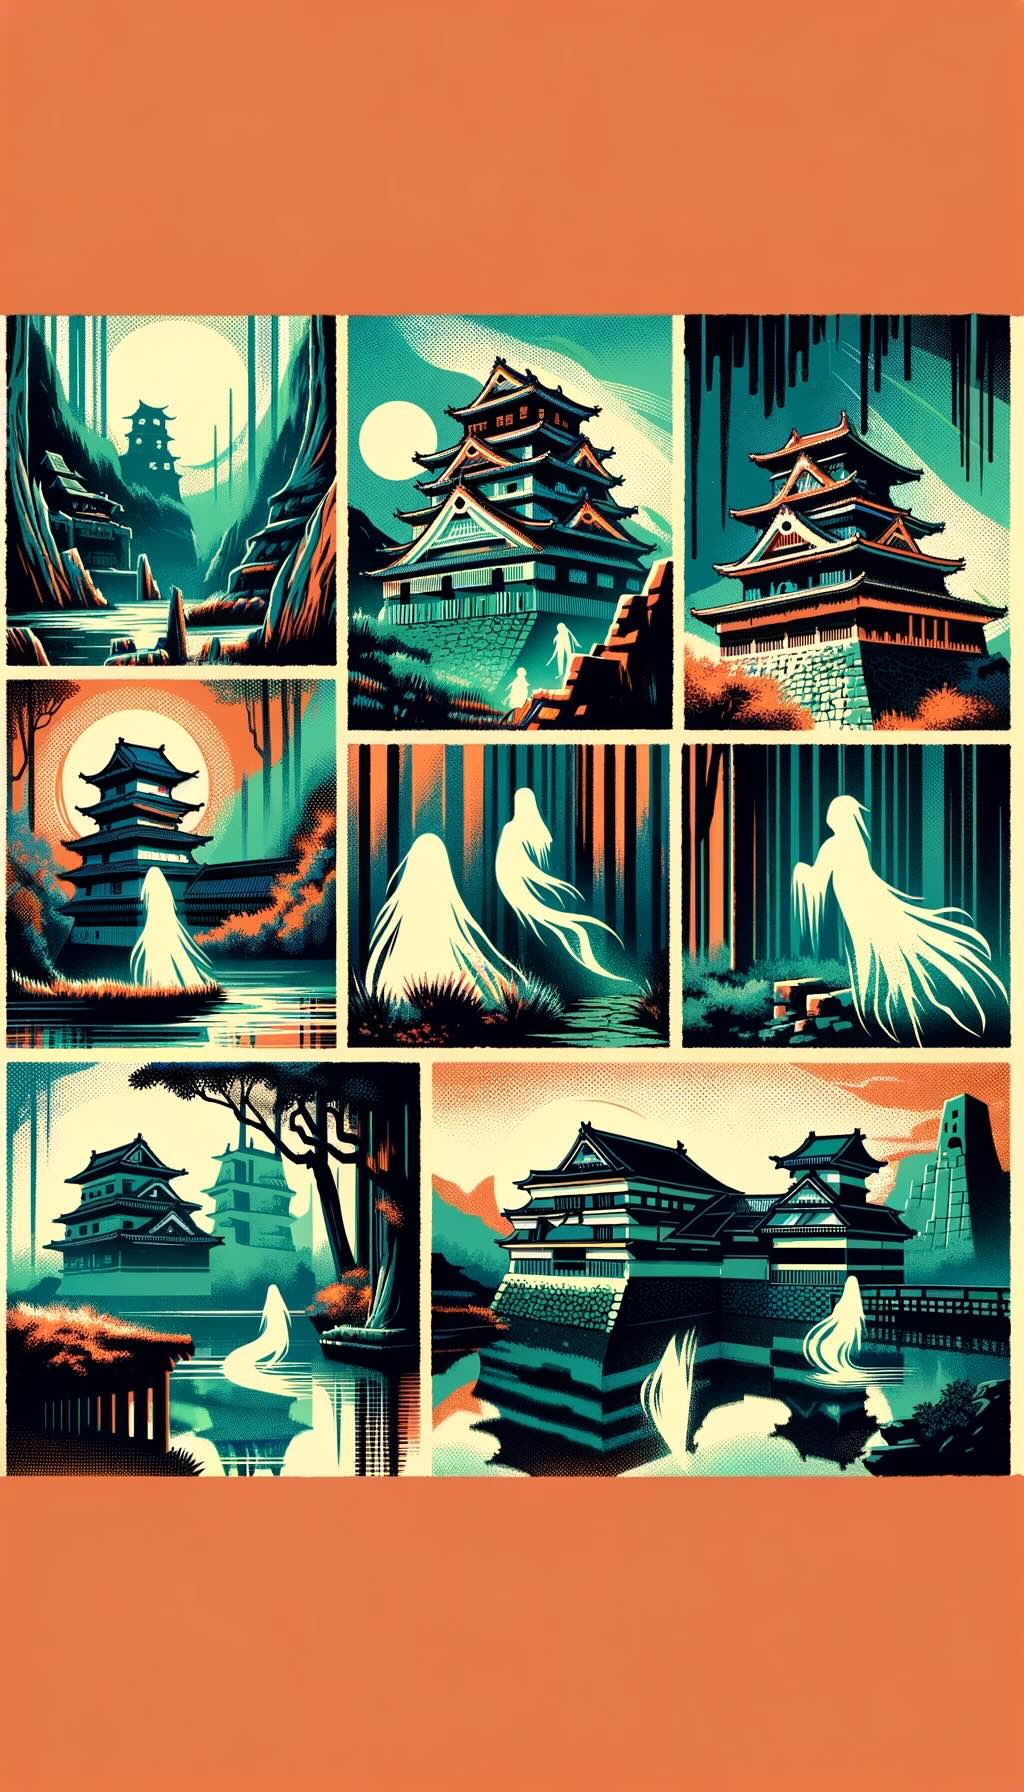 Exploration of Japan's haunted historical sites. Mystical Atmosphere: The artwork captures a mystical and eerie atmosphere, characteristic of haunted locations in Japan. Iconic Haunted Sites: It showcases several scenes of iconic haunted places, such as ancient castles, abandoned temples, and eerie forests. Supernatural Essence: Each scene is imbued with a mysterious and supernatural feel, featuring ghostly figures and spectral elements integrated subtly into the landscapes. Artistic Interpretation: The style is inspired by early 20th-century avant-garde movements, utilizing bold colors, geometric shapes, and abstract forms. Dynamic Representation: The composition creates a dynamic and otherworldly representation of Japan's haunted historical sites, inviting viewers to sense the haunting beauty and mystery of these locations. This image aims to convey the unique and eerie charm of Japan's haunted historical sites, blending art with the supernatural.